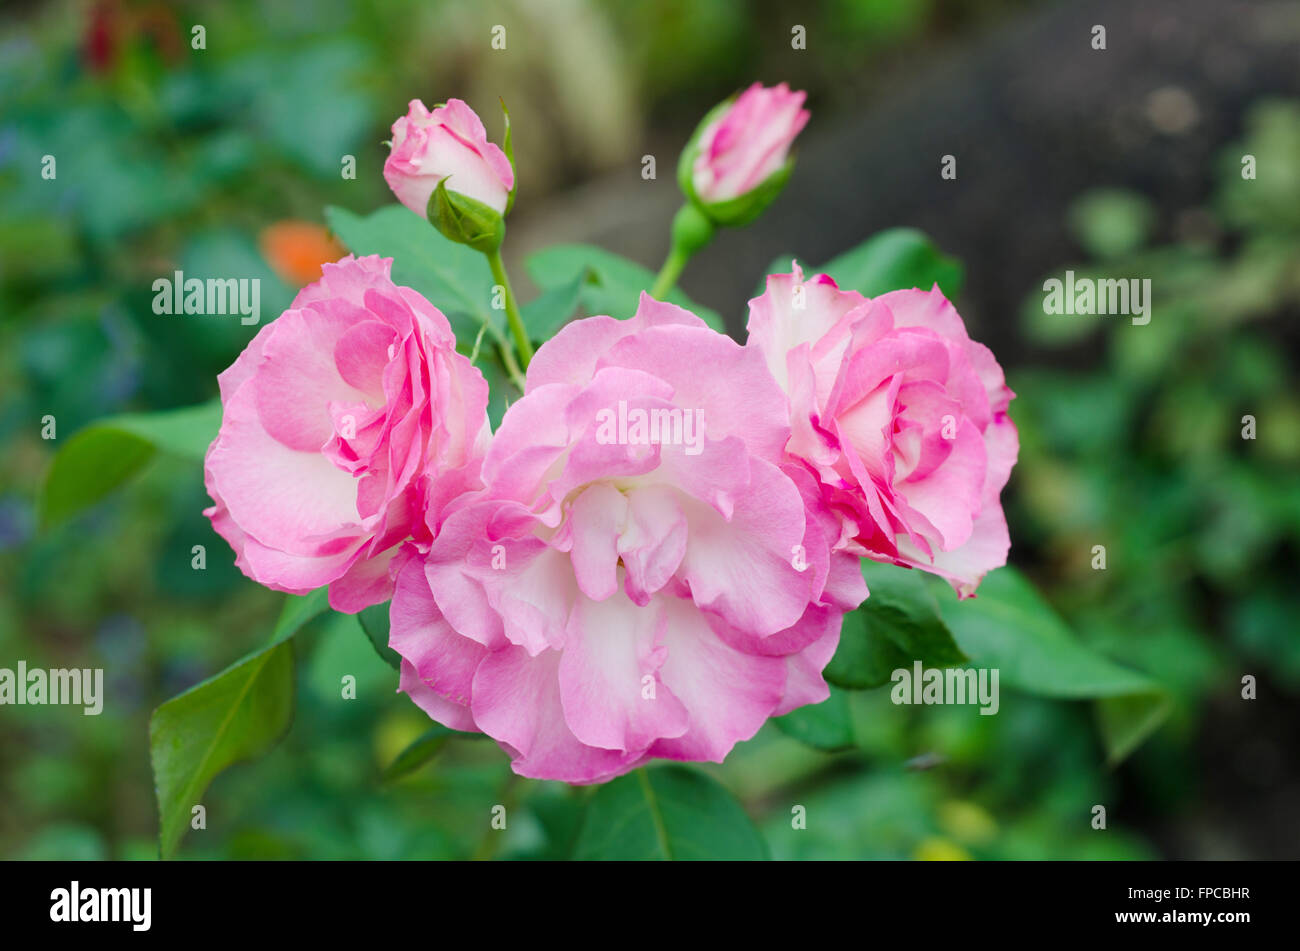 pink rose blossom Stock Photo